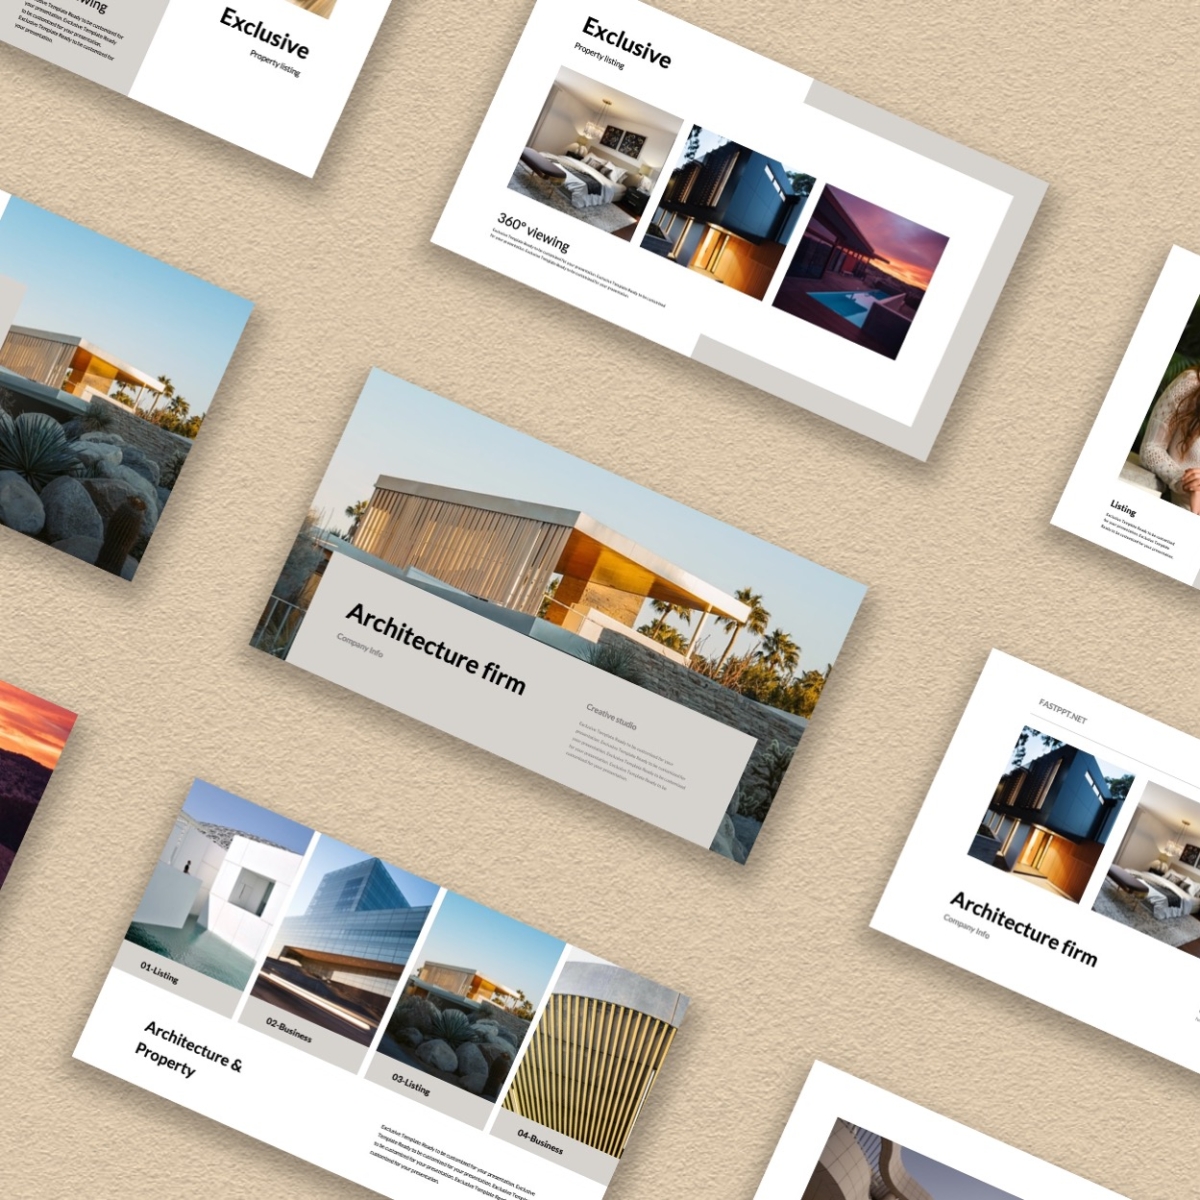 Architecture and Property Minimal Presentation Template